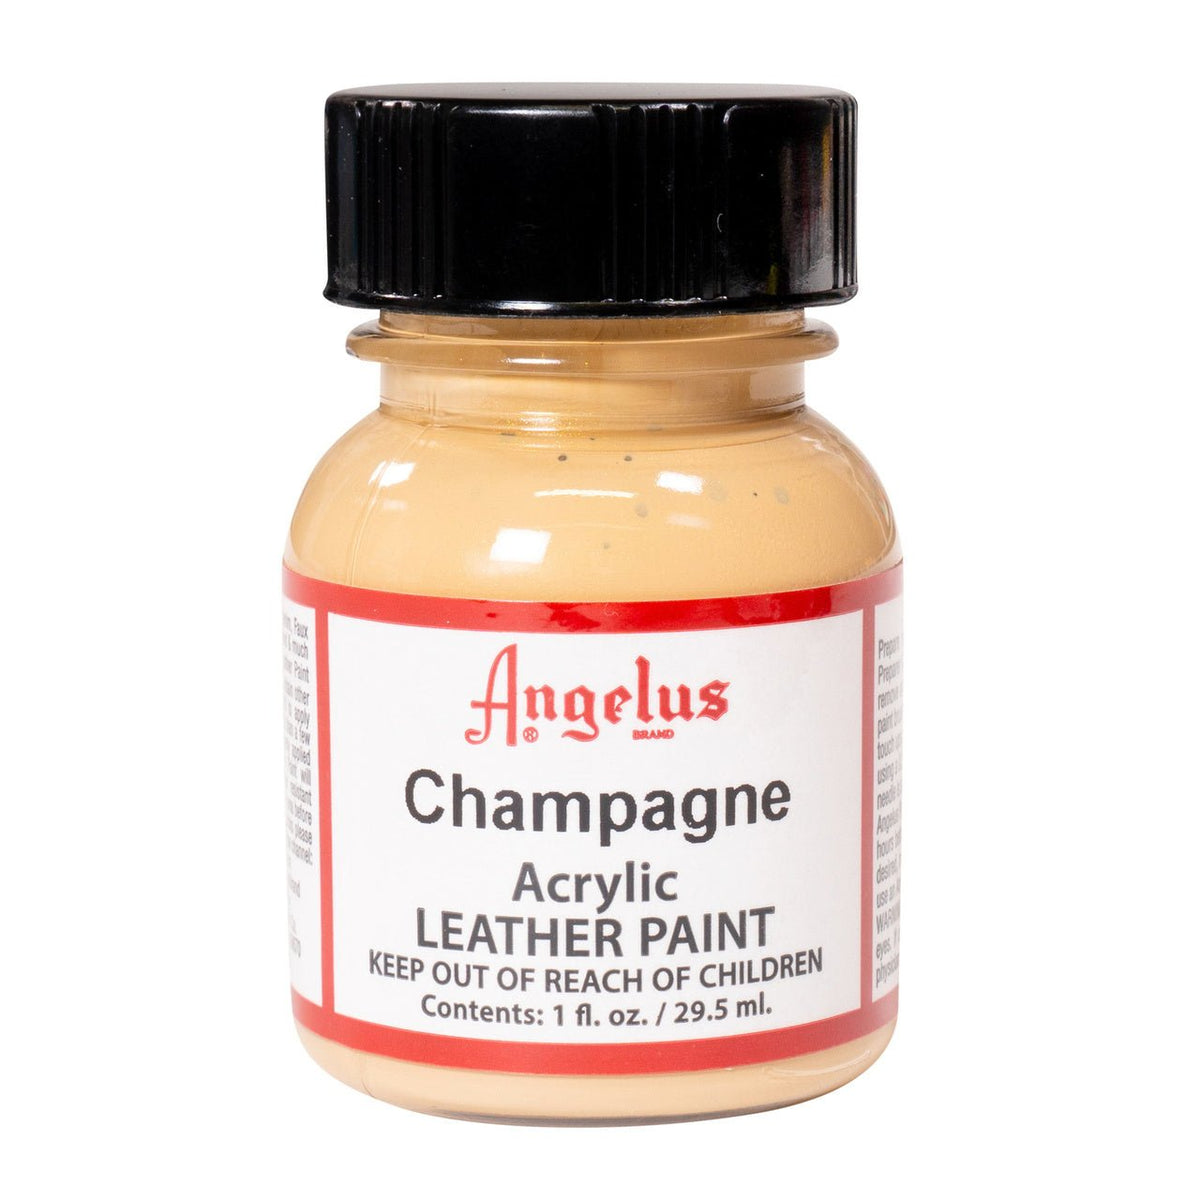 Angelus Acrylic Leather Paint - 1 oz. Bottle - Champagne - merriartist.com